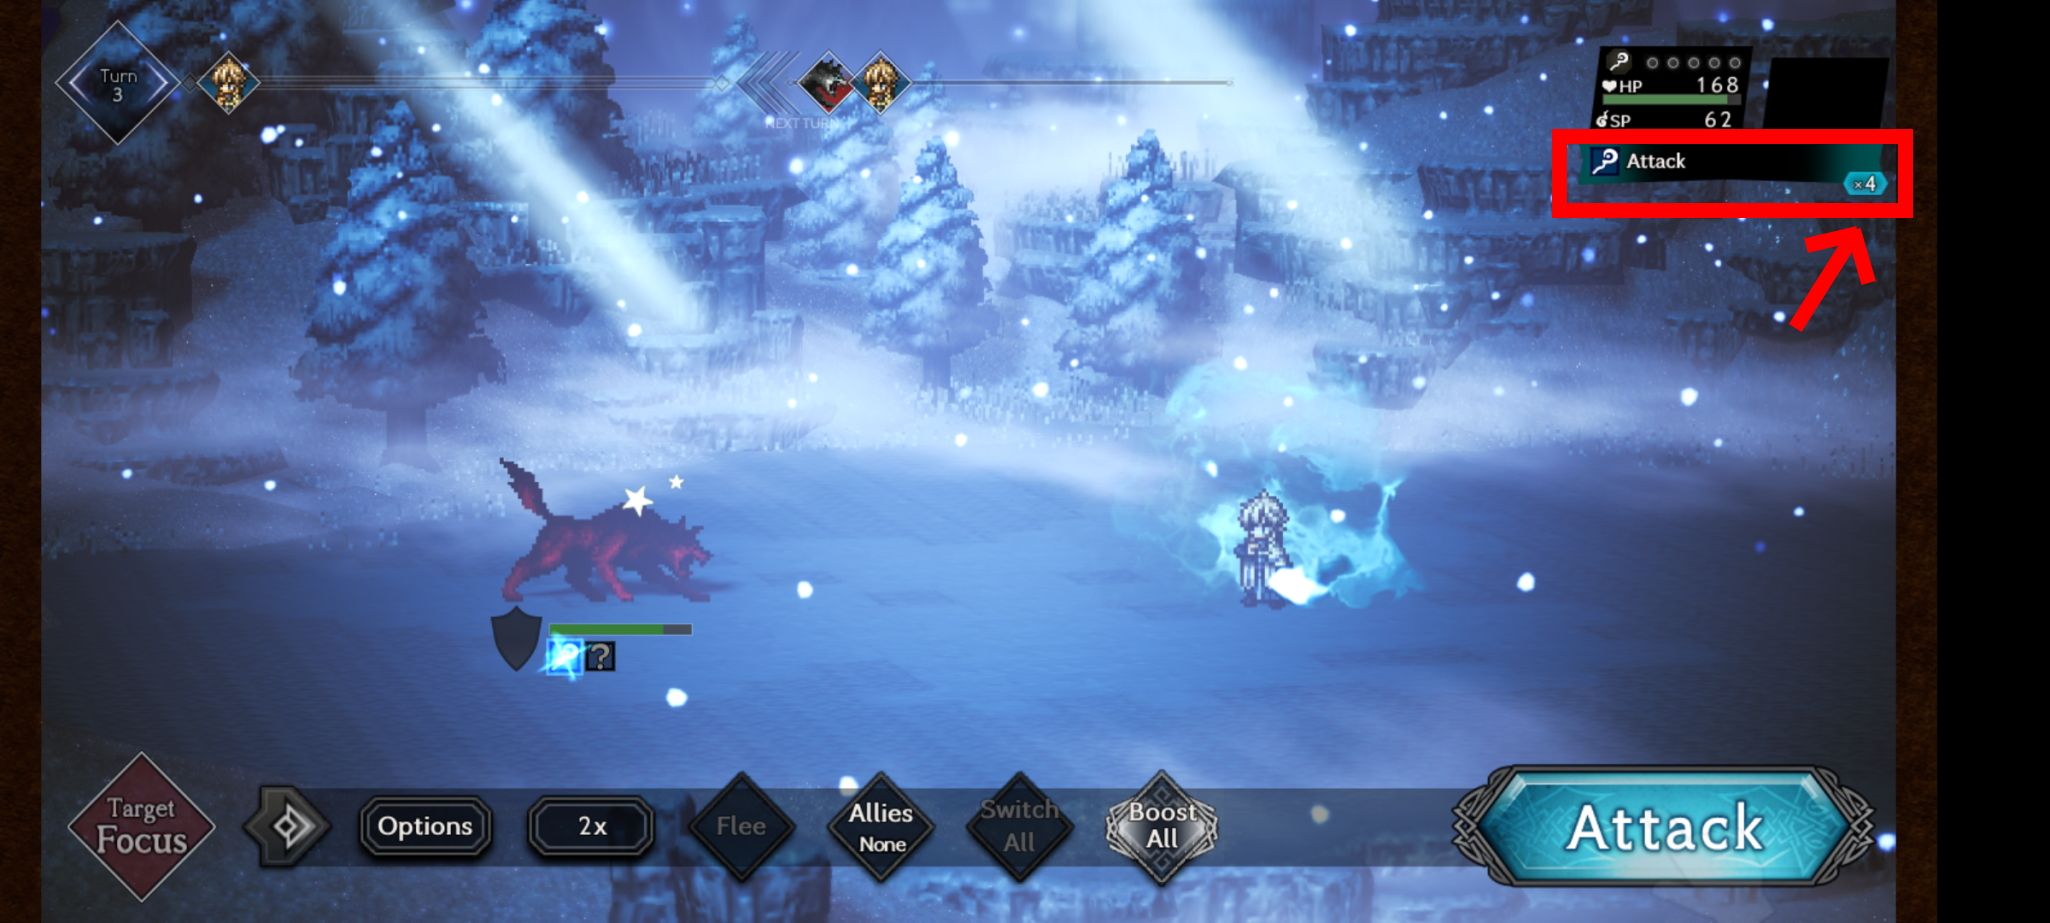 Using boosts in Octopath Traveler: Champions of the Continent